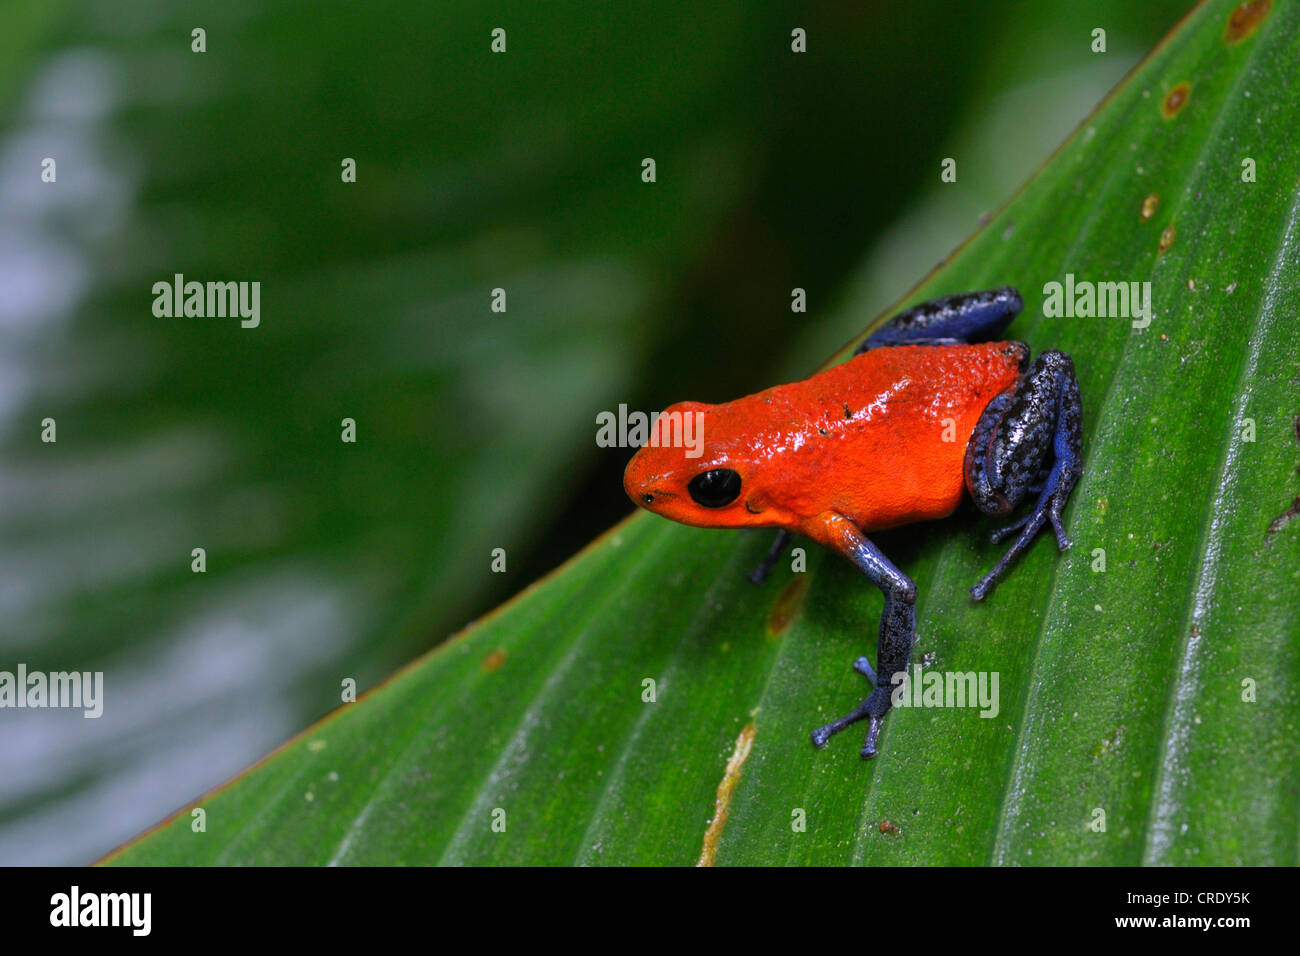 strawberry poison-arrrow frog, red-and-blue poison-arrow frog, flaming poison-arrow frog, Blue Jeans Poison Dart Frog (Dendrobates pumilio), sitting on a leaf, Costa Rica Stock Photo